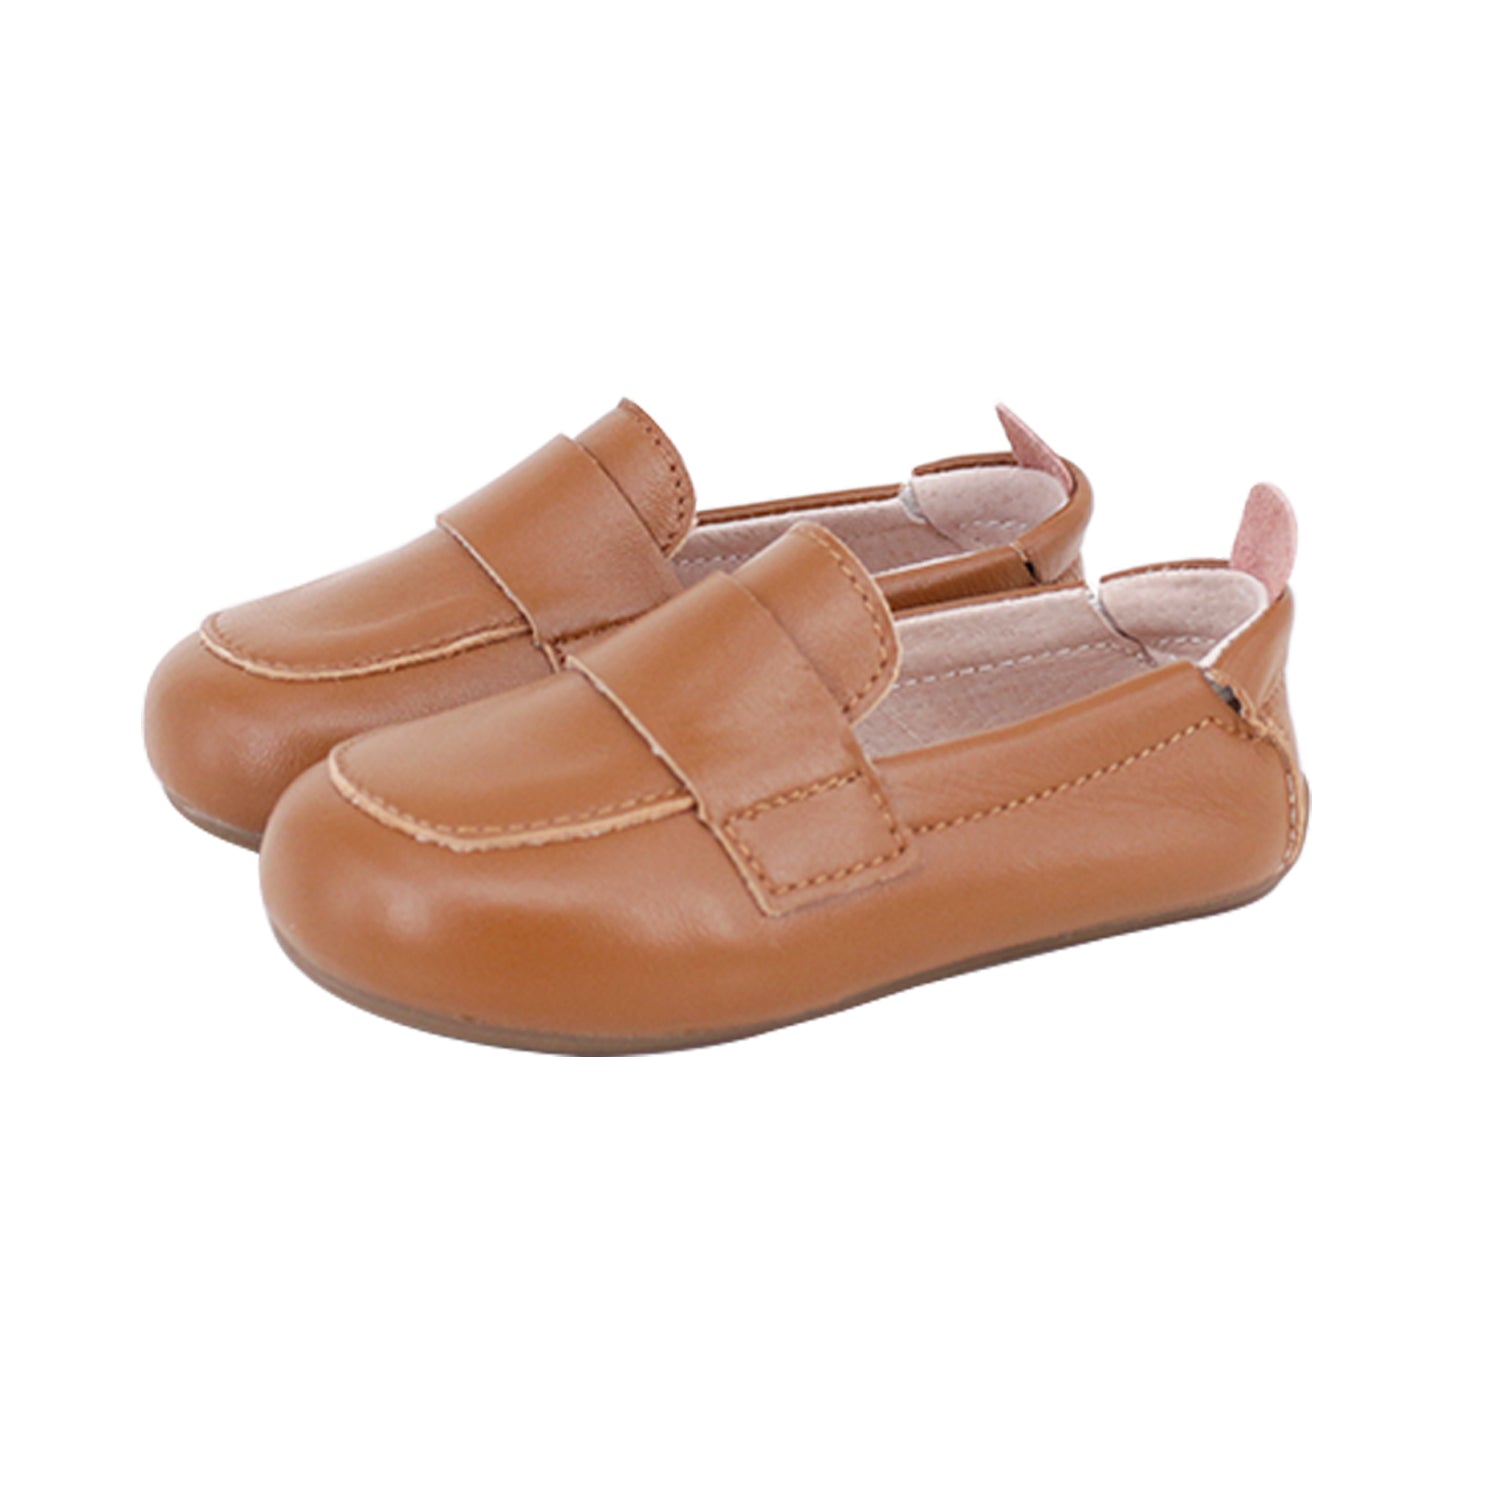 SKEANIE Shoes | Kids Oliver Leather Booties, Walker | Baby AU Shoes Pre Socks & for Bunting Tan - Loafers